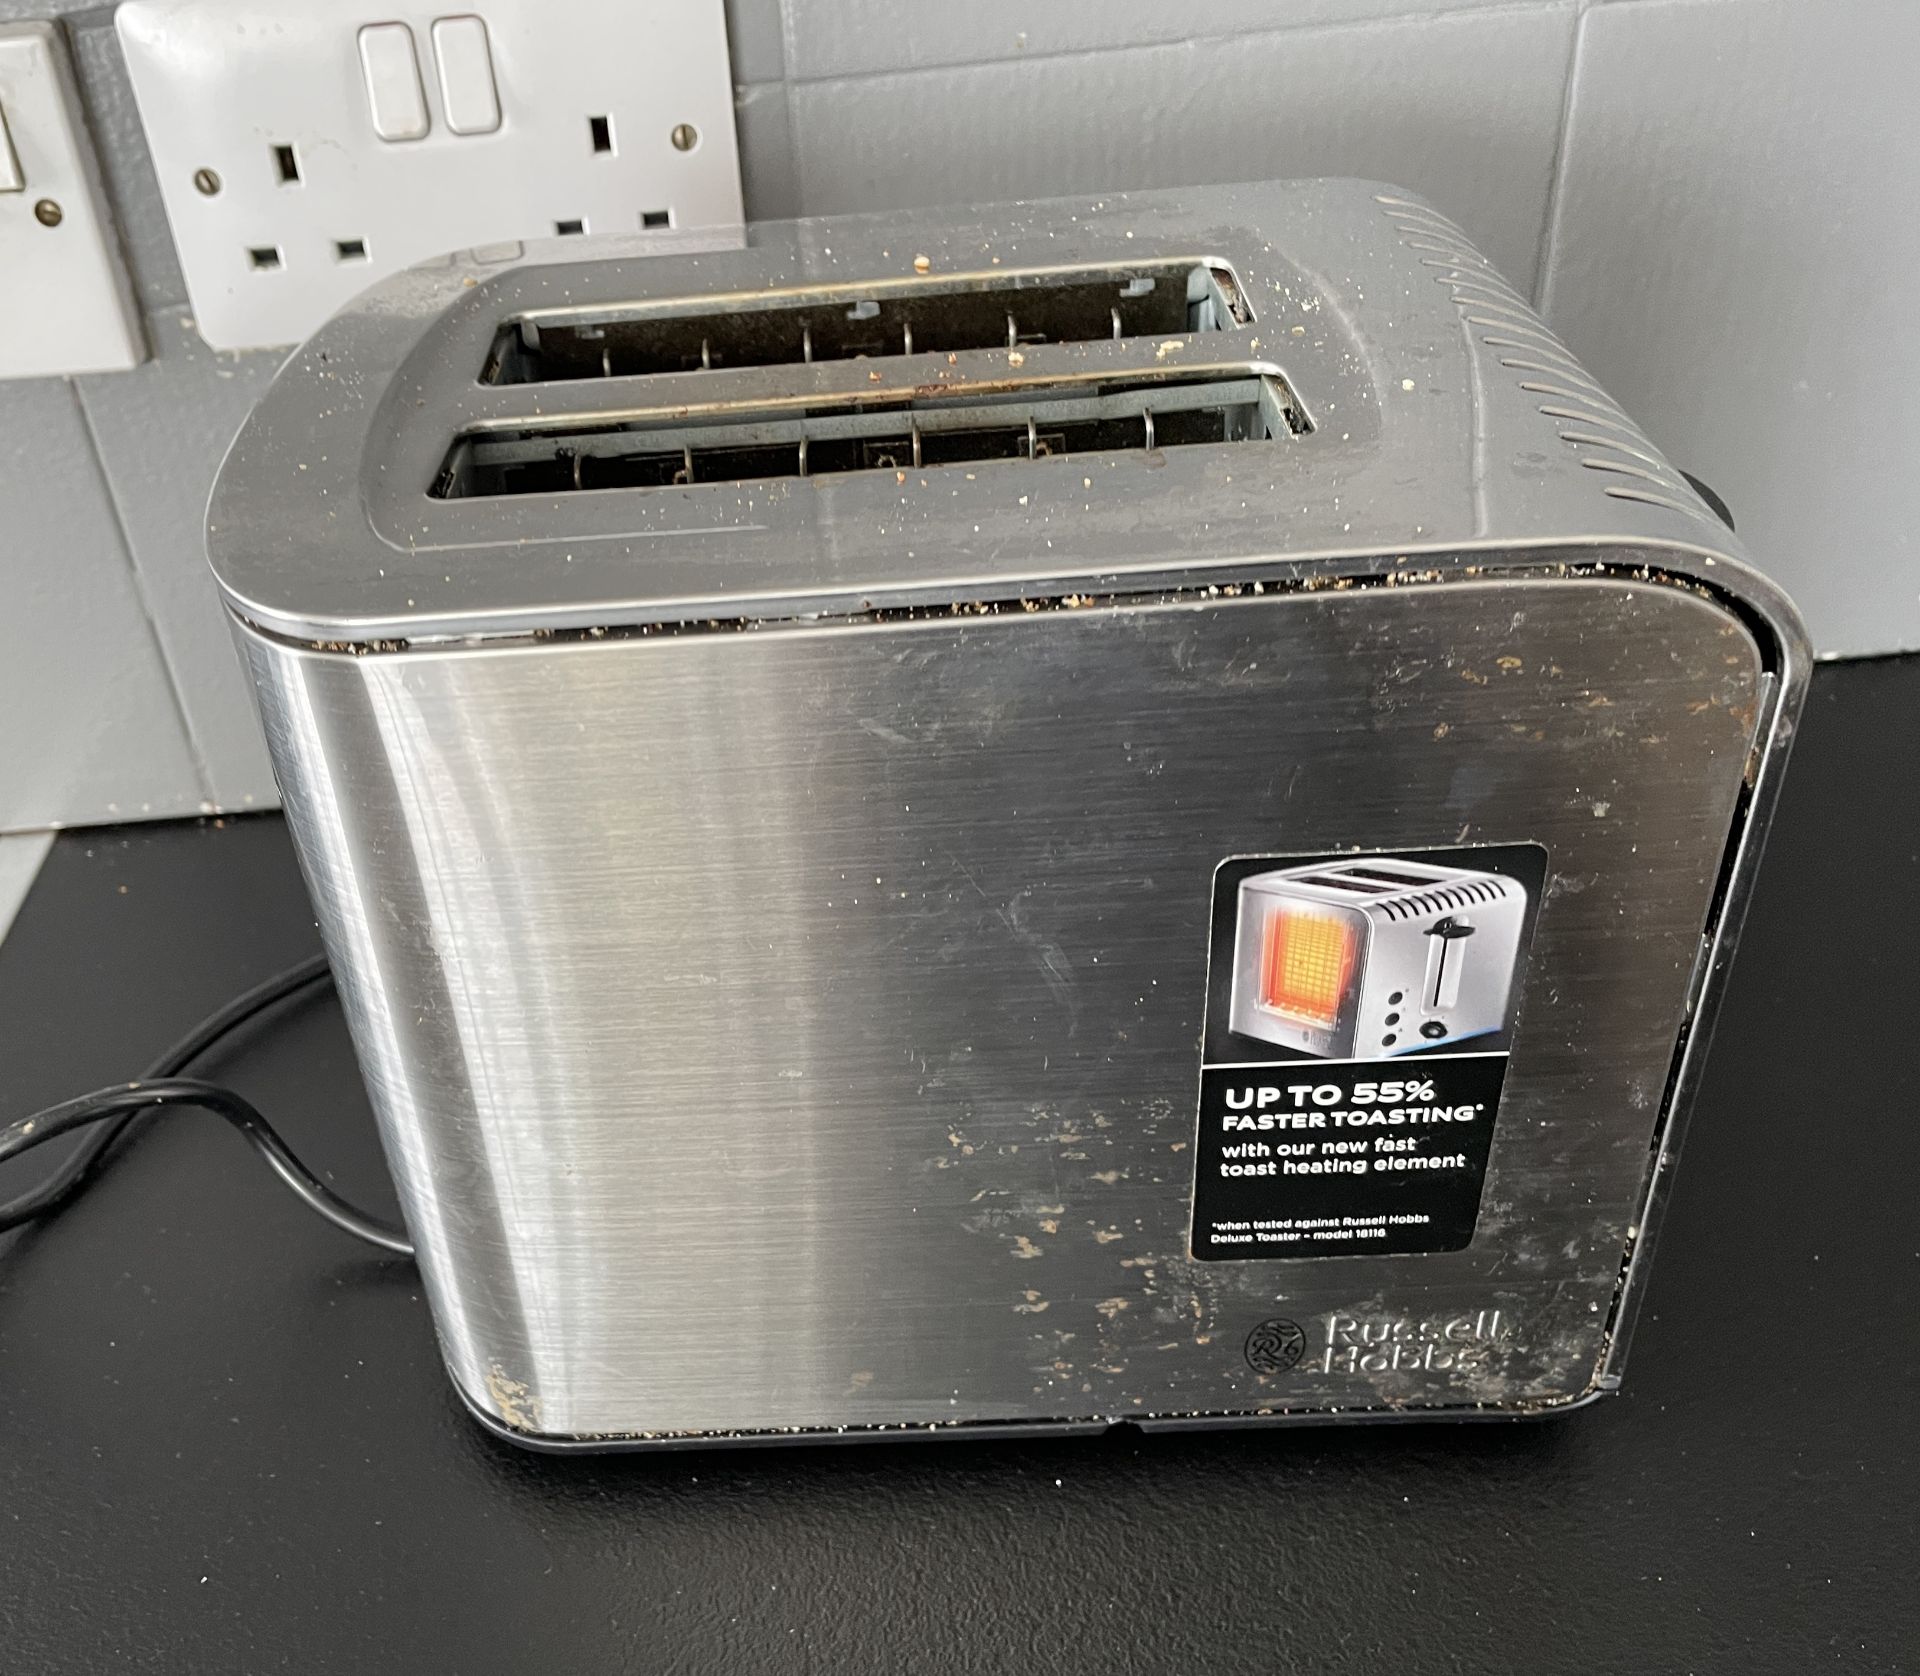 1 x Microwave and Toaster - From An Exclusive Property In Leeds - No VAT on the Hammer - CL648 - - Image 2 of 2